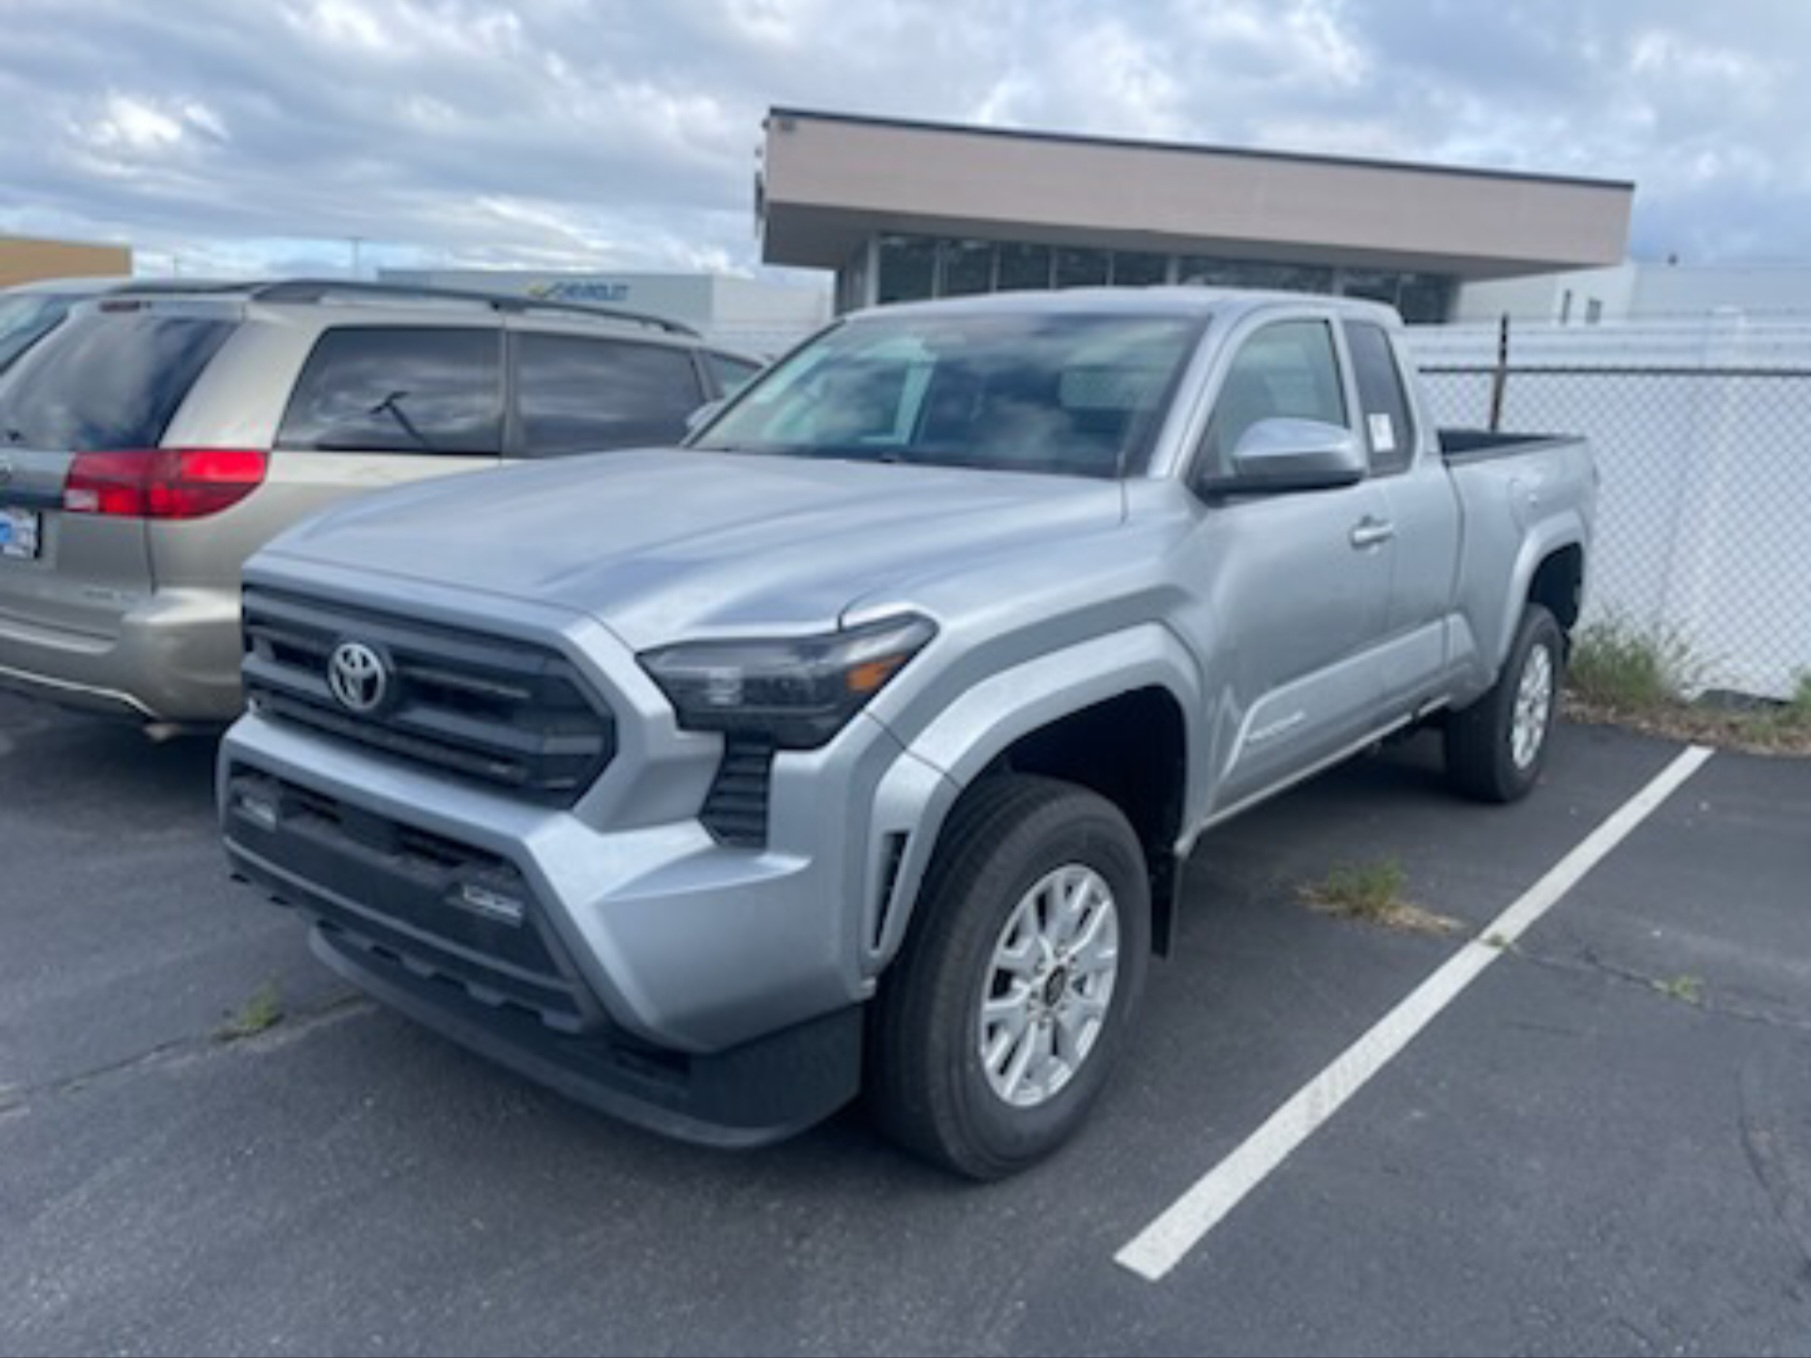 2024 Tacoma Delivered 4X4 SR5 Xtracab in Celestial Silver Metallic 1000007389